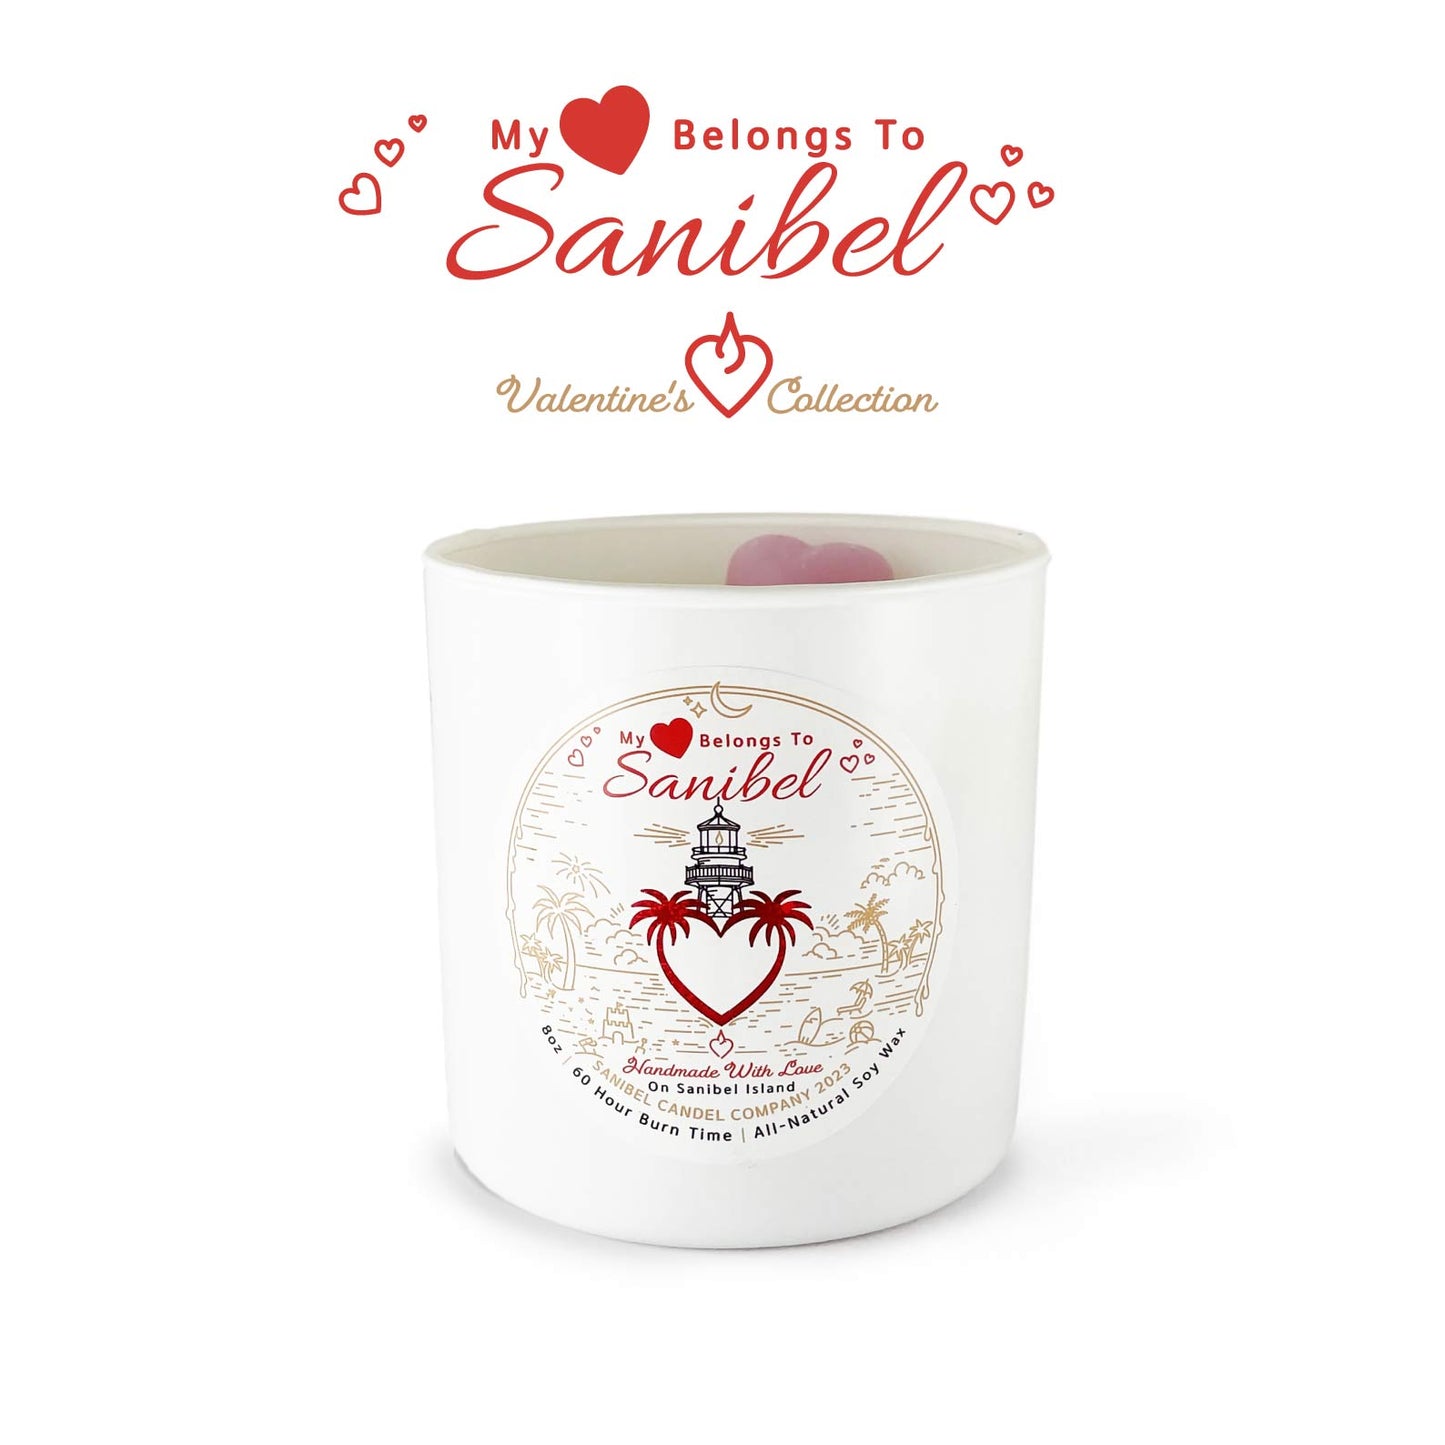 My Heart Belongs To Sanibel - Valentine's Day Candle - 8 oz